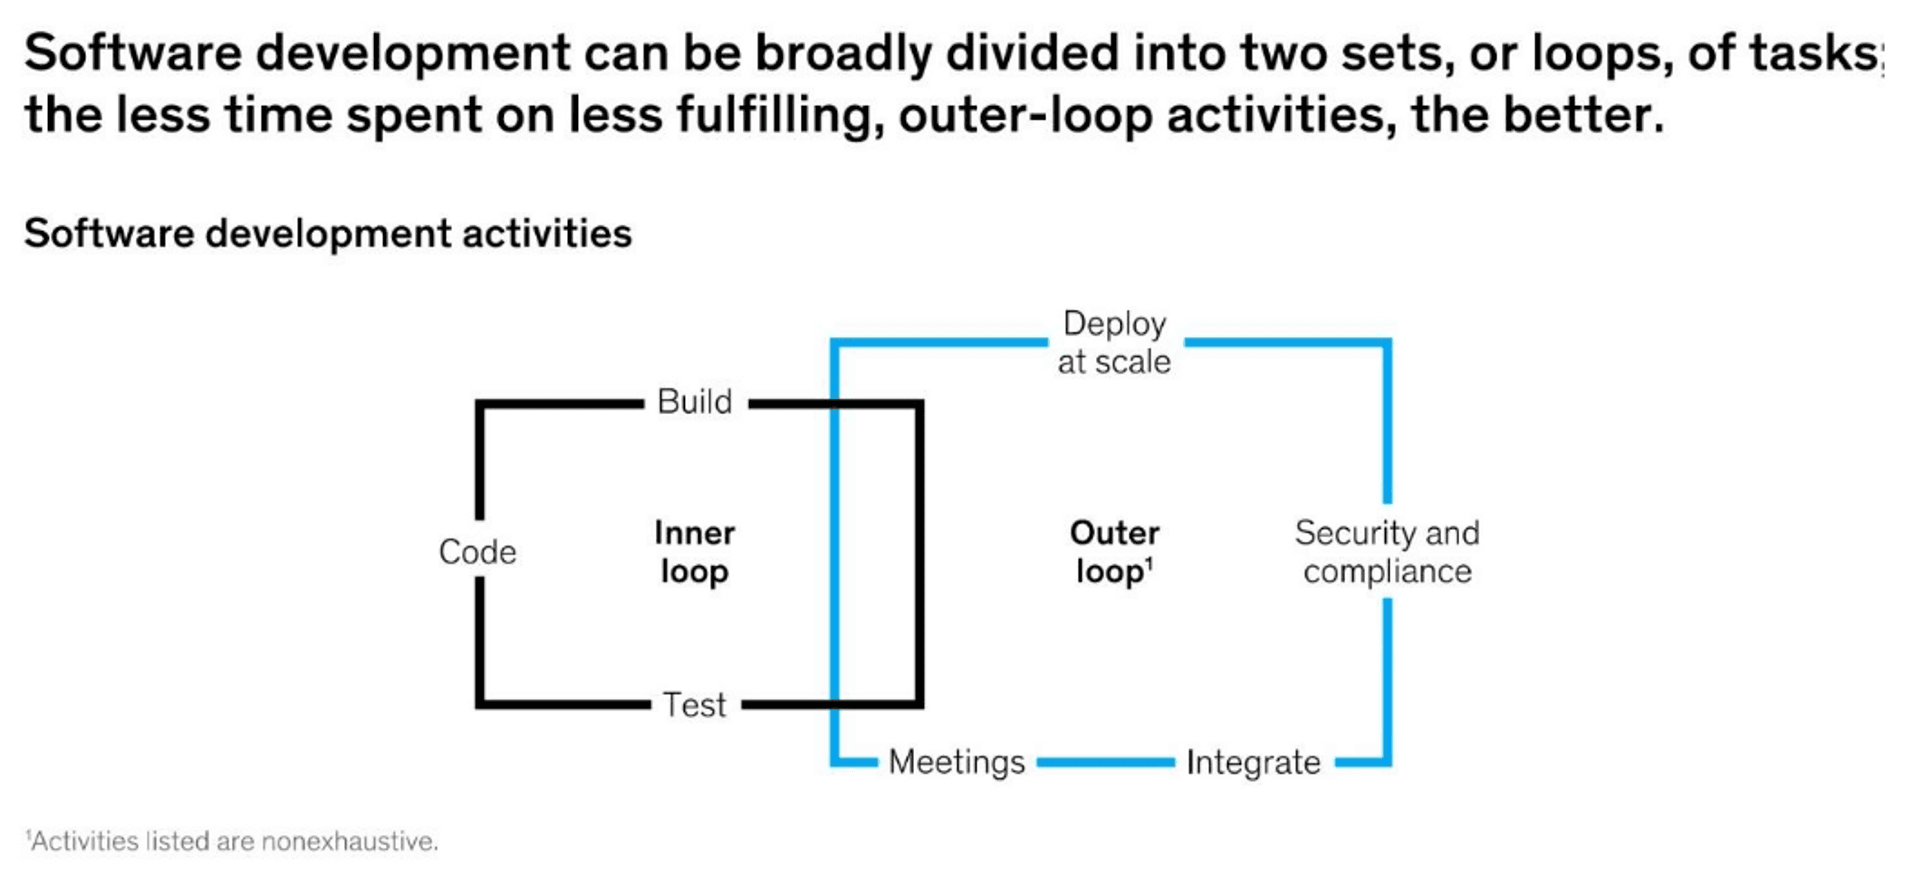 Software development can be broadly divided into two sets, or loops, of tasks; the less time spent on less fulfilling, outer-loop activities, the better. Source: McKinsey.